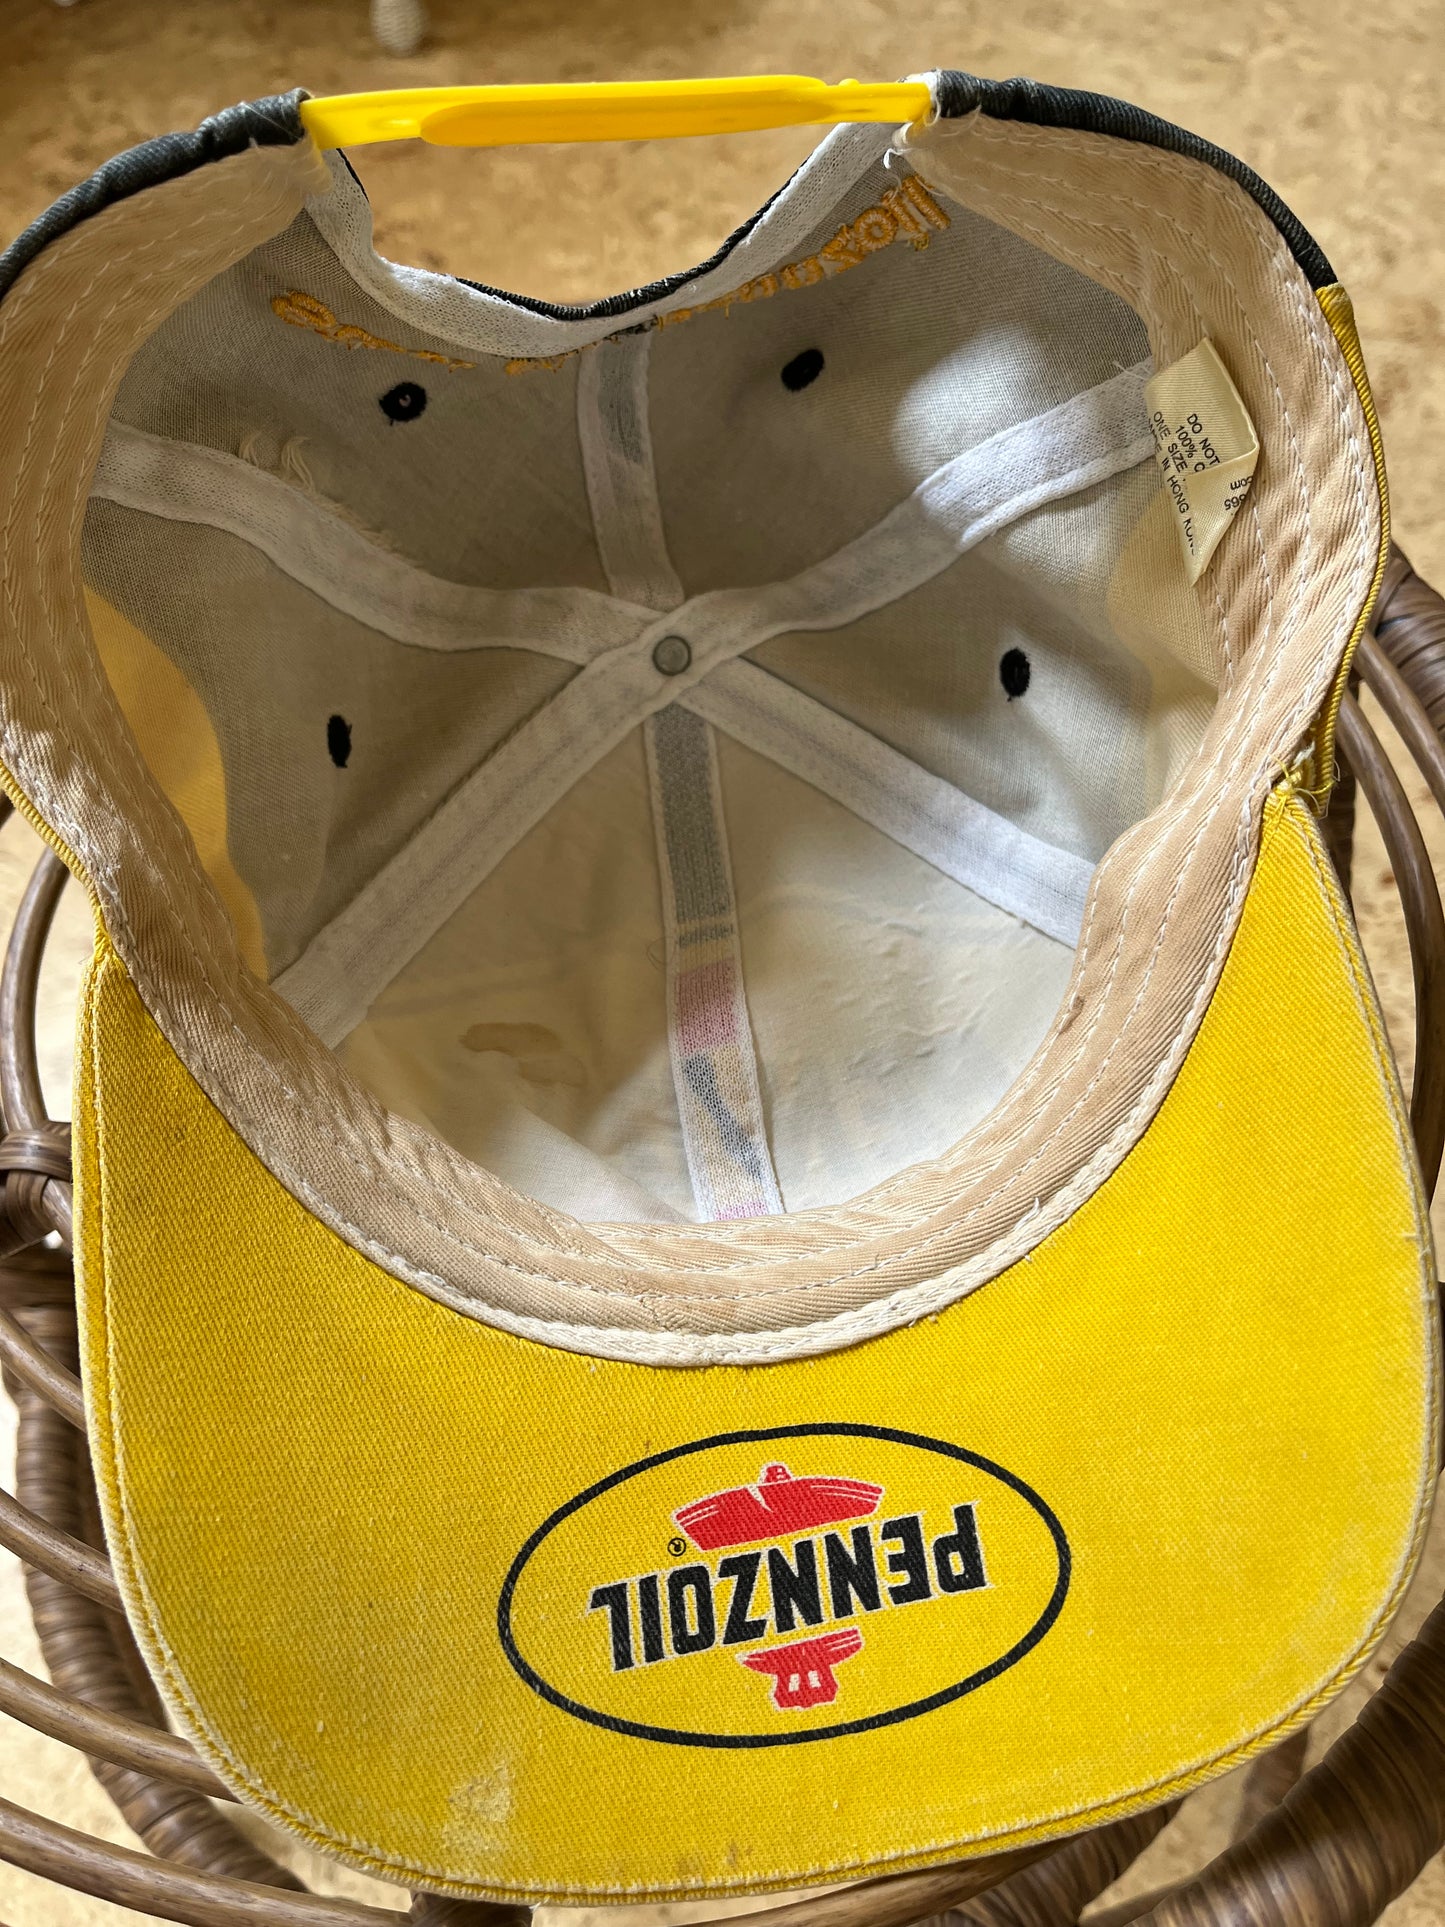 Pennzoil Monte Carlo Faded Hat